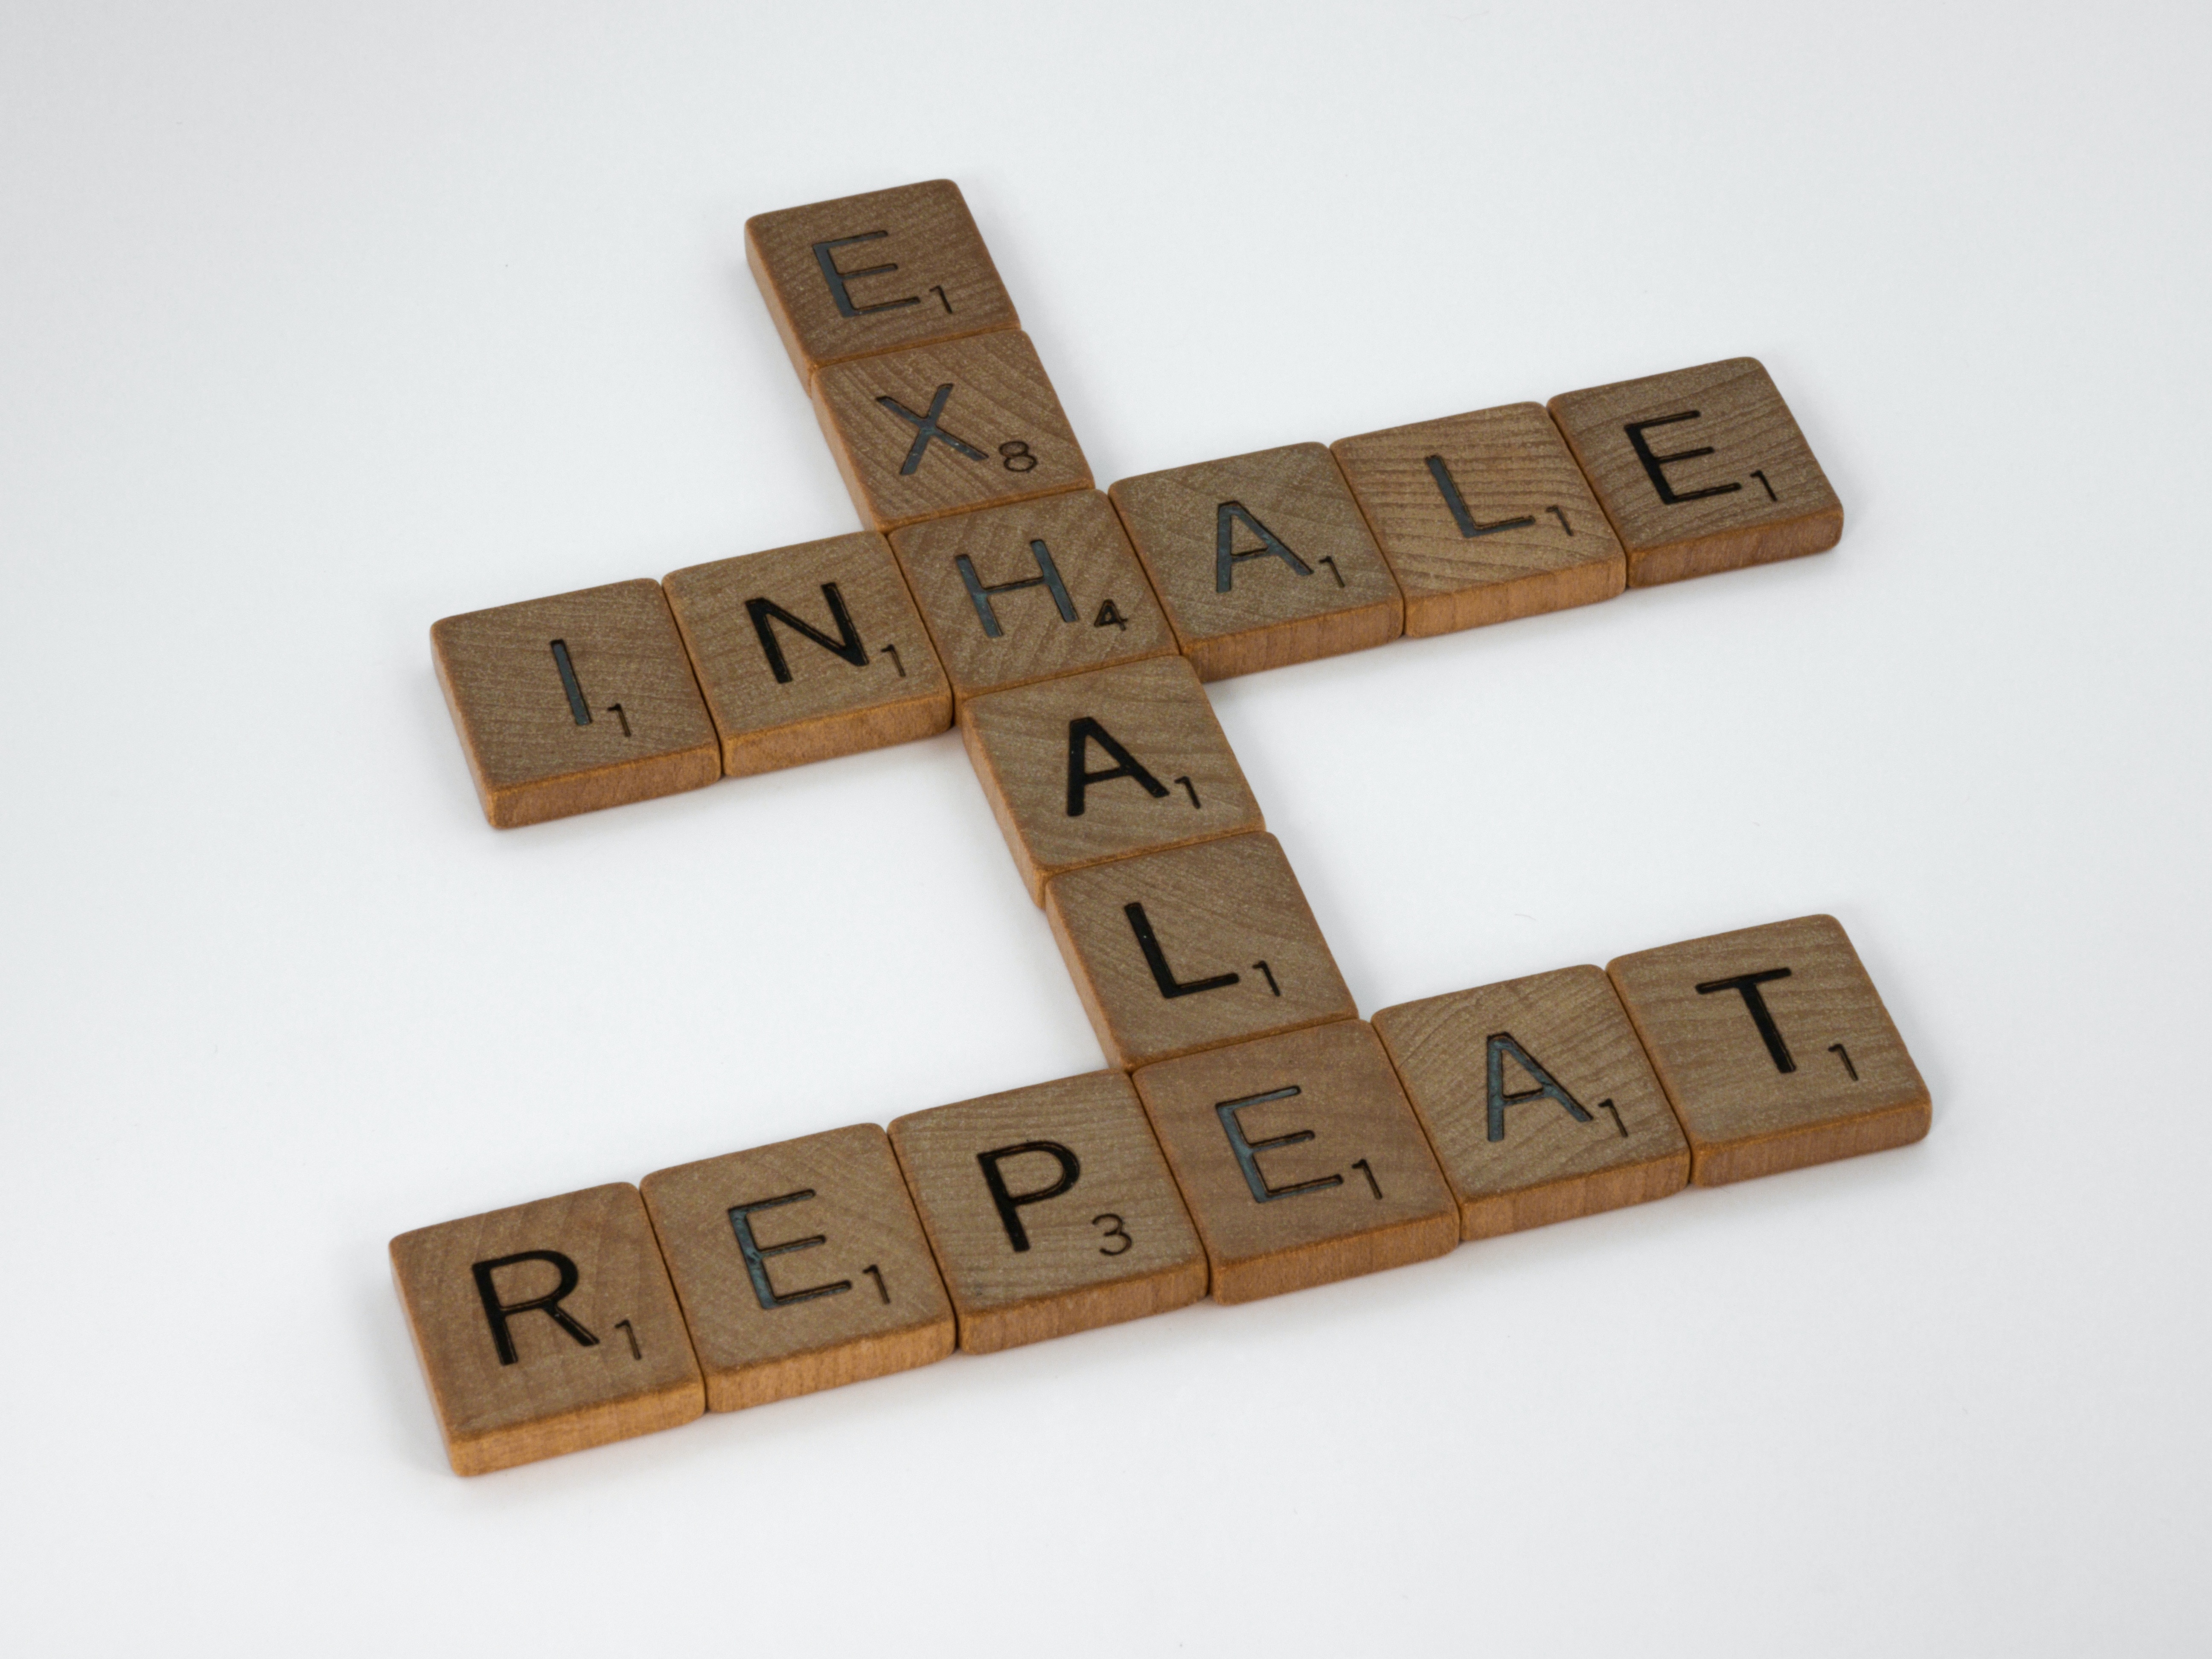 words: inhale exhale repeat